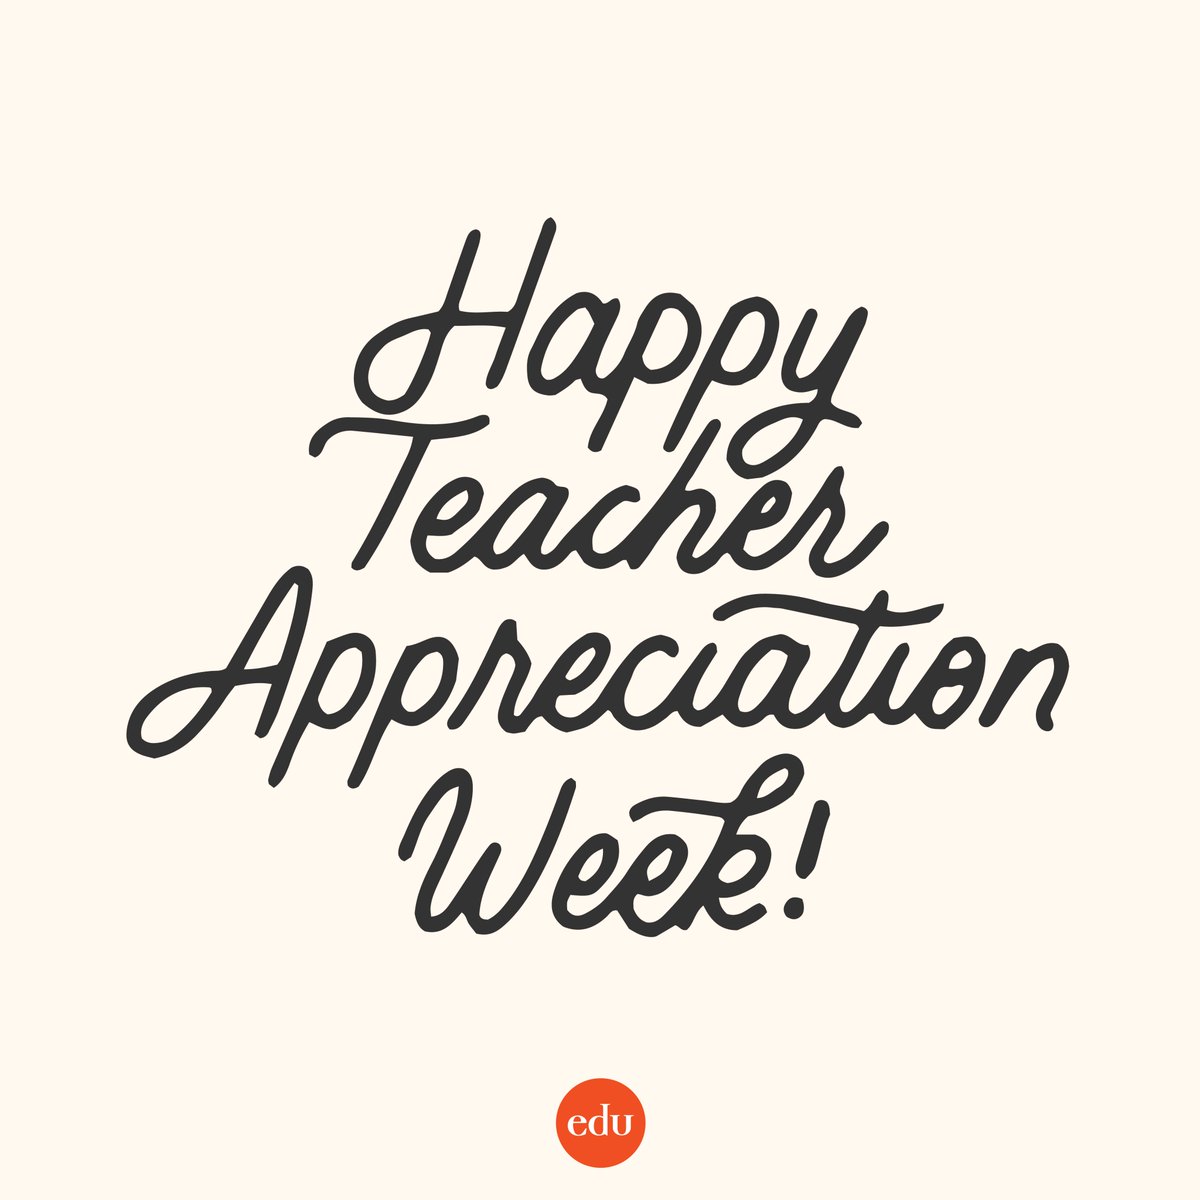 I thanked over a dozen teachers in my book's acknowledgements for a reason. It's just a fact: I wouldn’t be where I’m at if it weren’t for great teachers in my life, and I know a lot of us out there can say the same. Thank you teachers this week, and every week! @edutopia